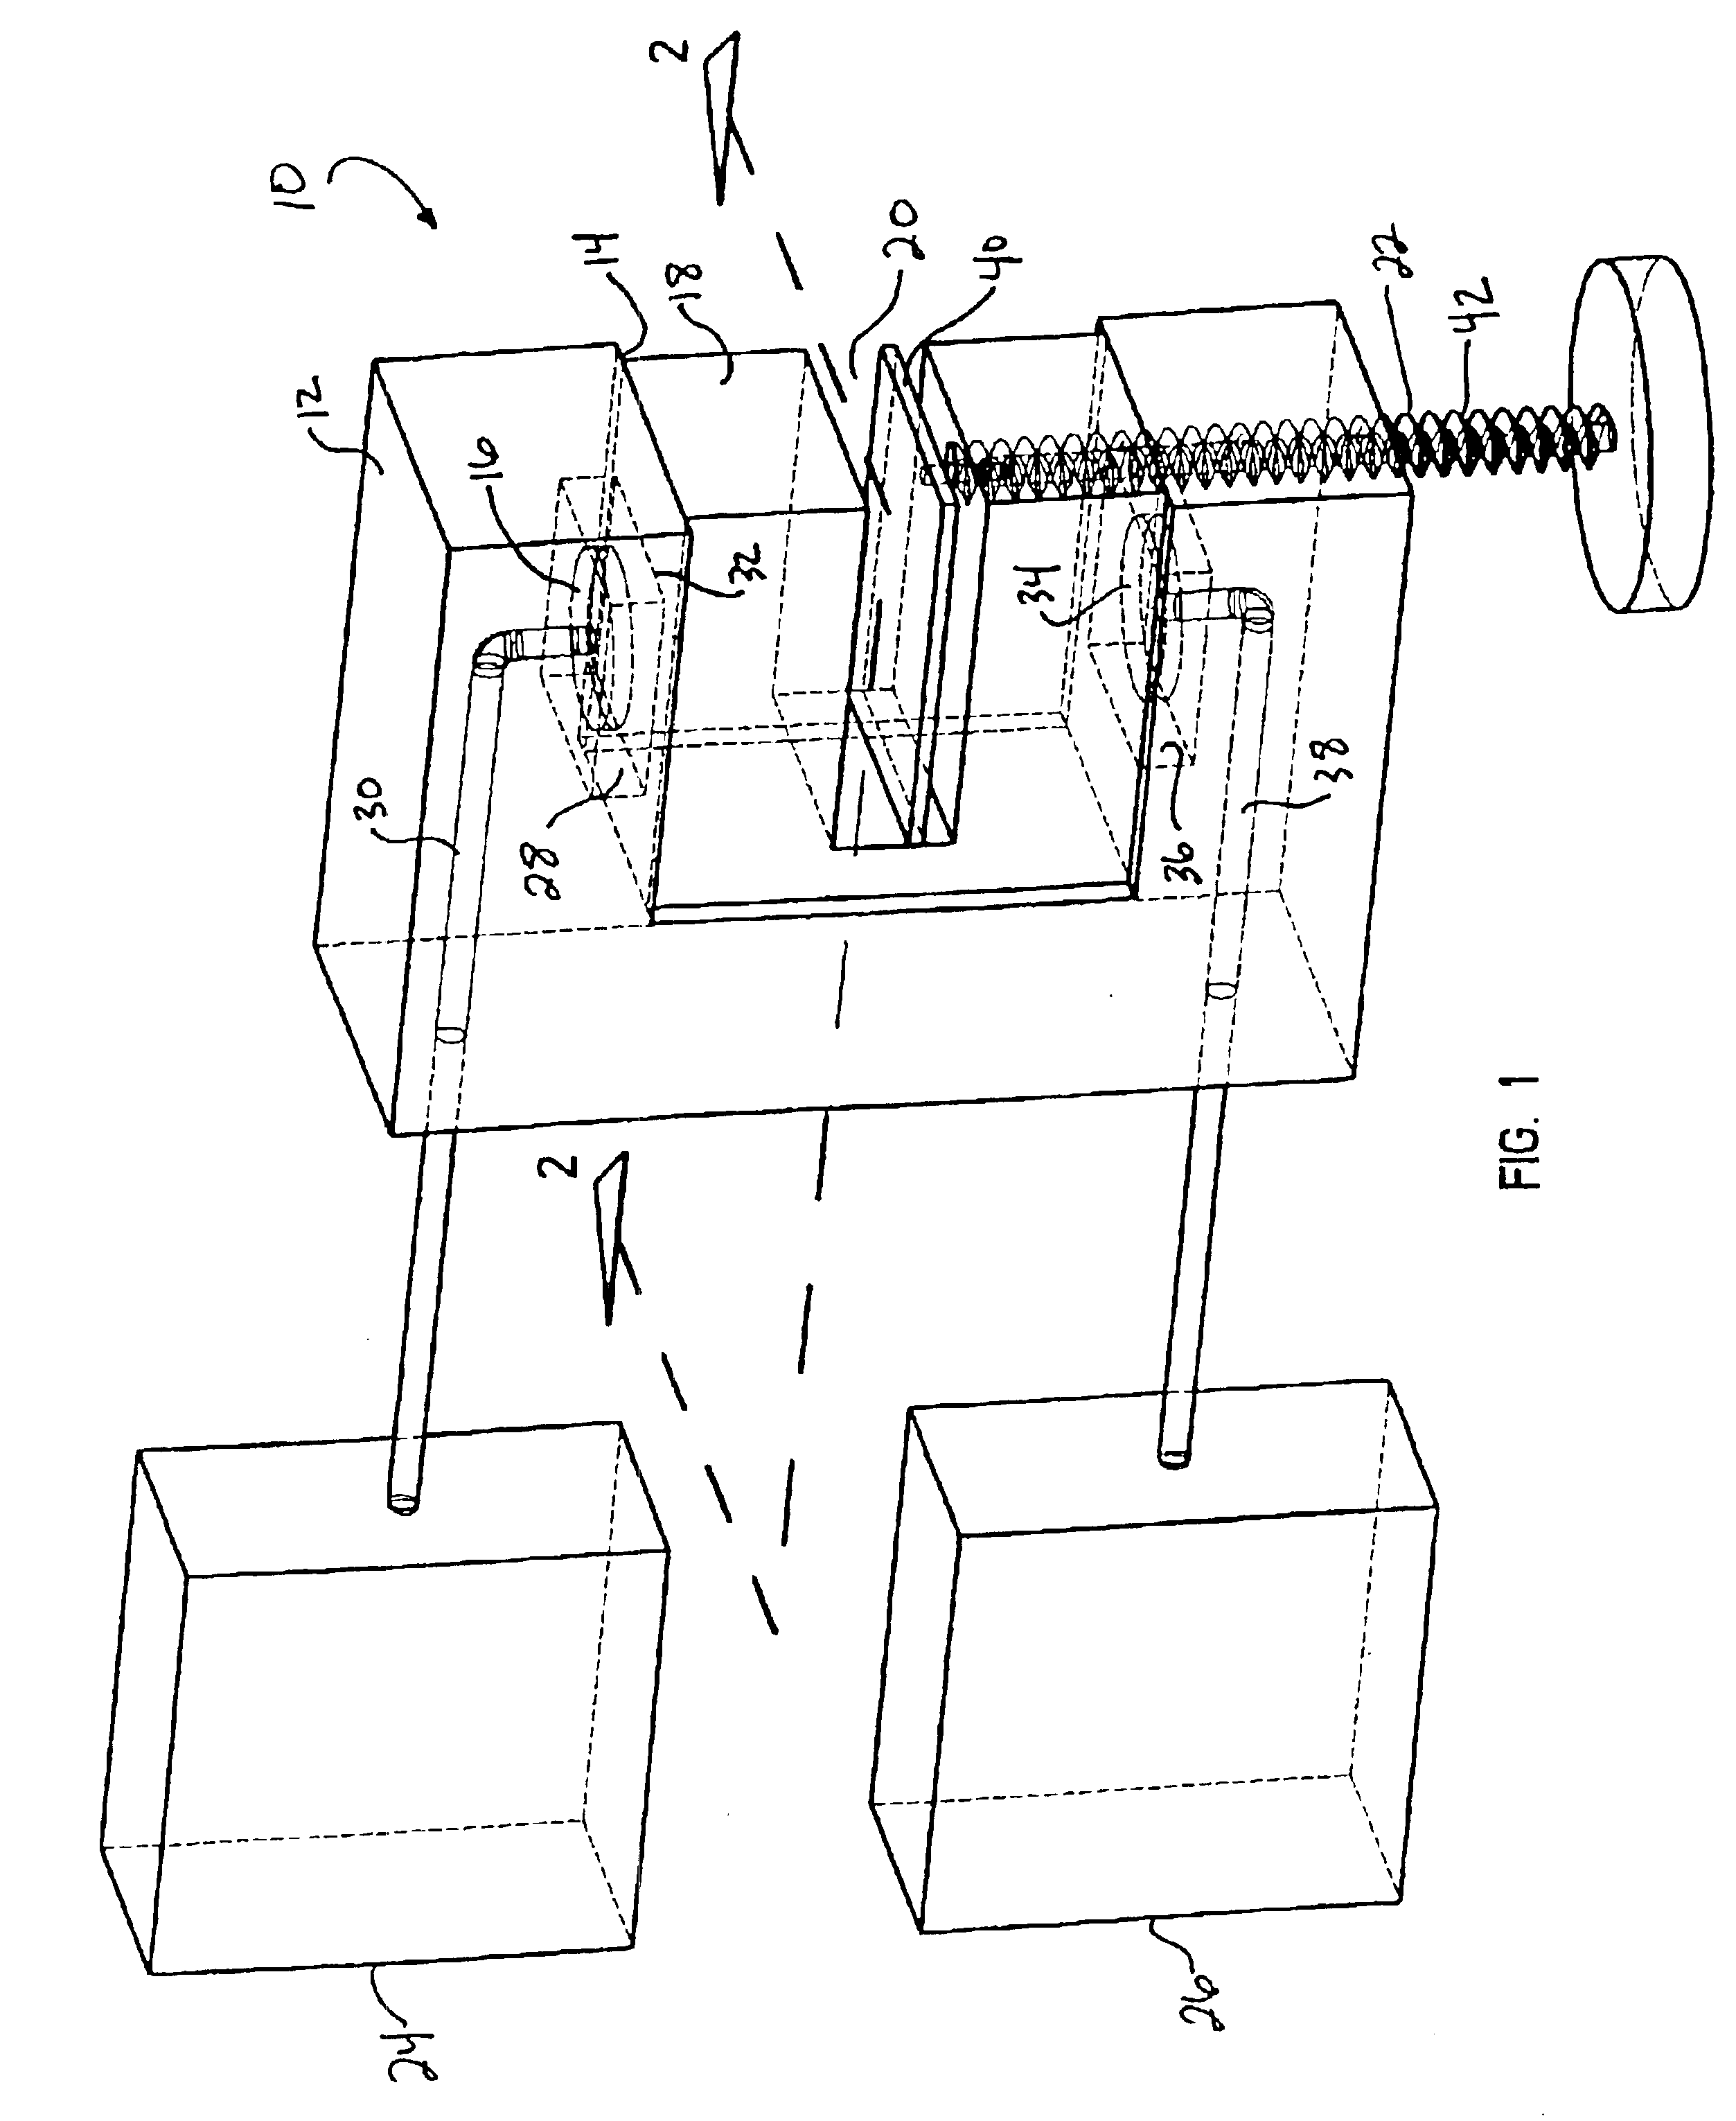 Apparatus and methods for performing non-invasive vasectomies